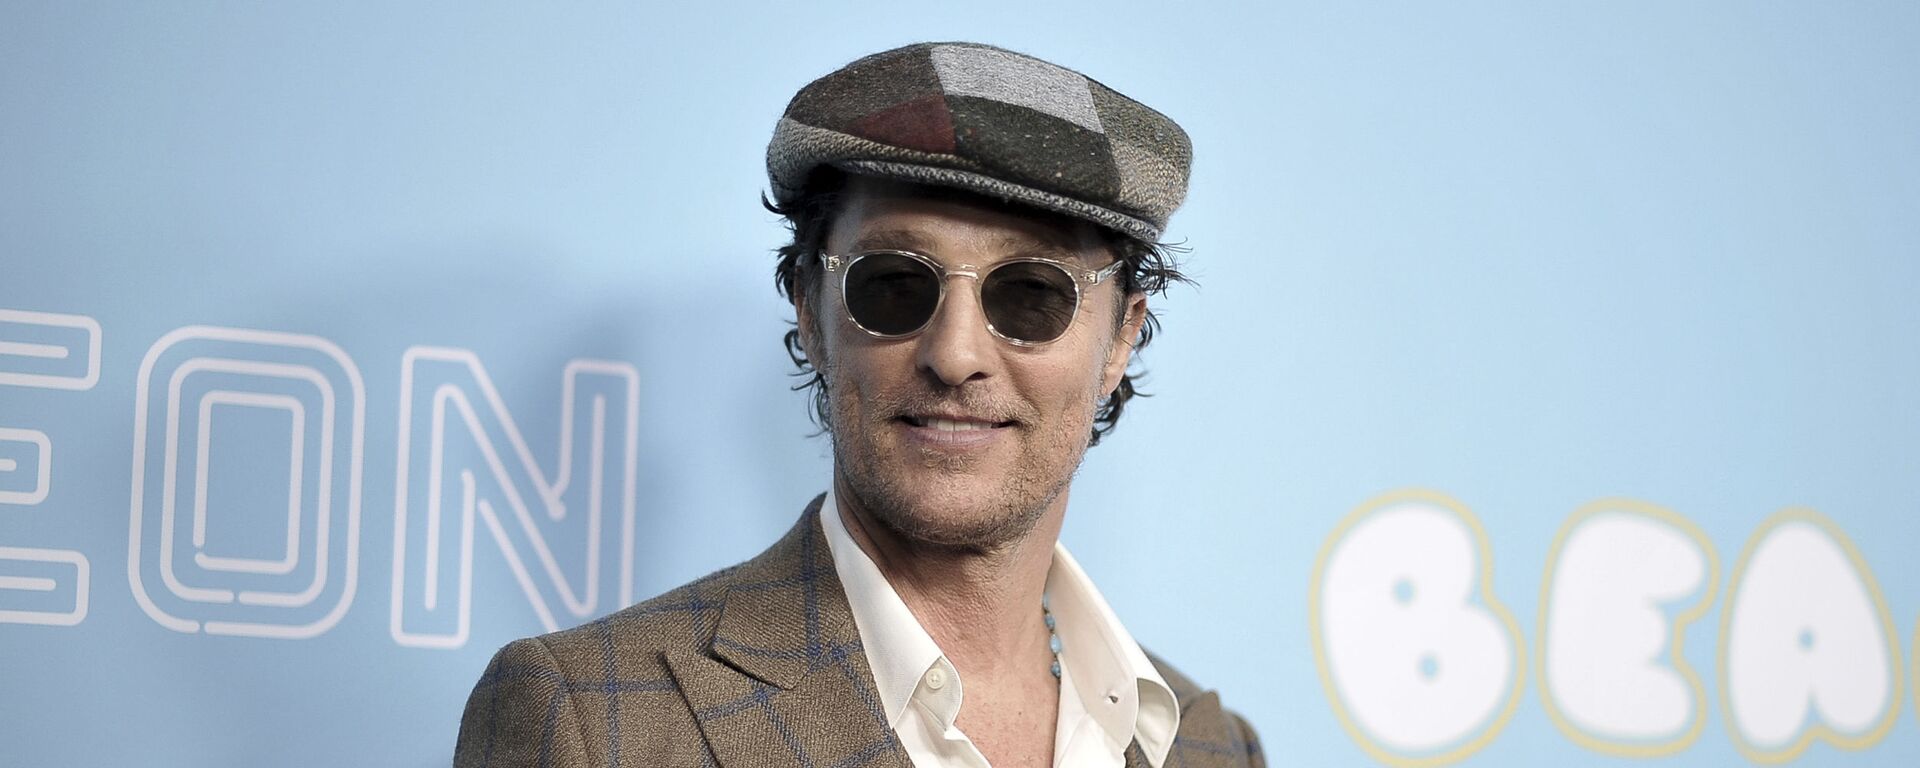 Matthew McConaughey attends the LA Premiere of The Beach Bum at ArcLight Hollywood on Thursday, March 28, 2019, in Los Angeles.  - Sputnik International, 1920, 22.11.2021